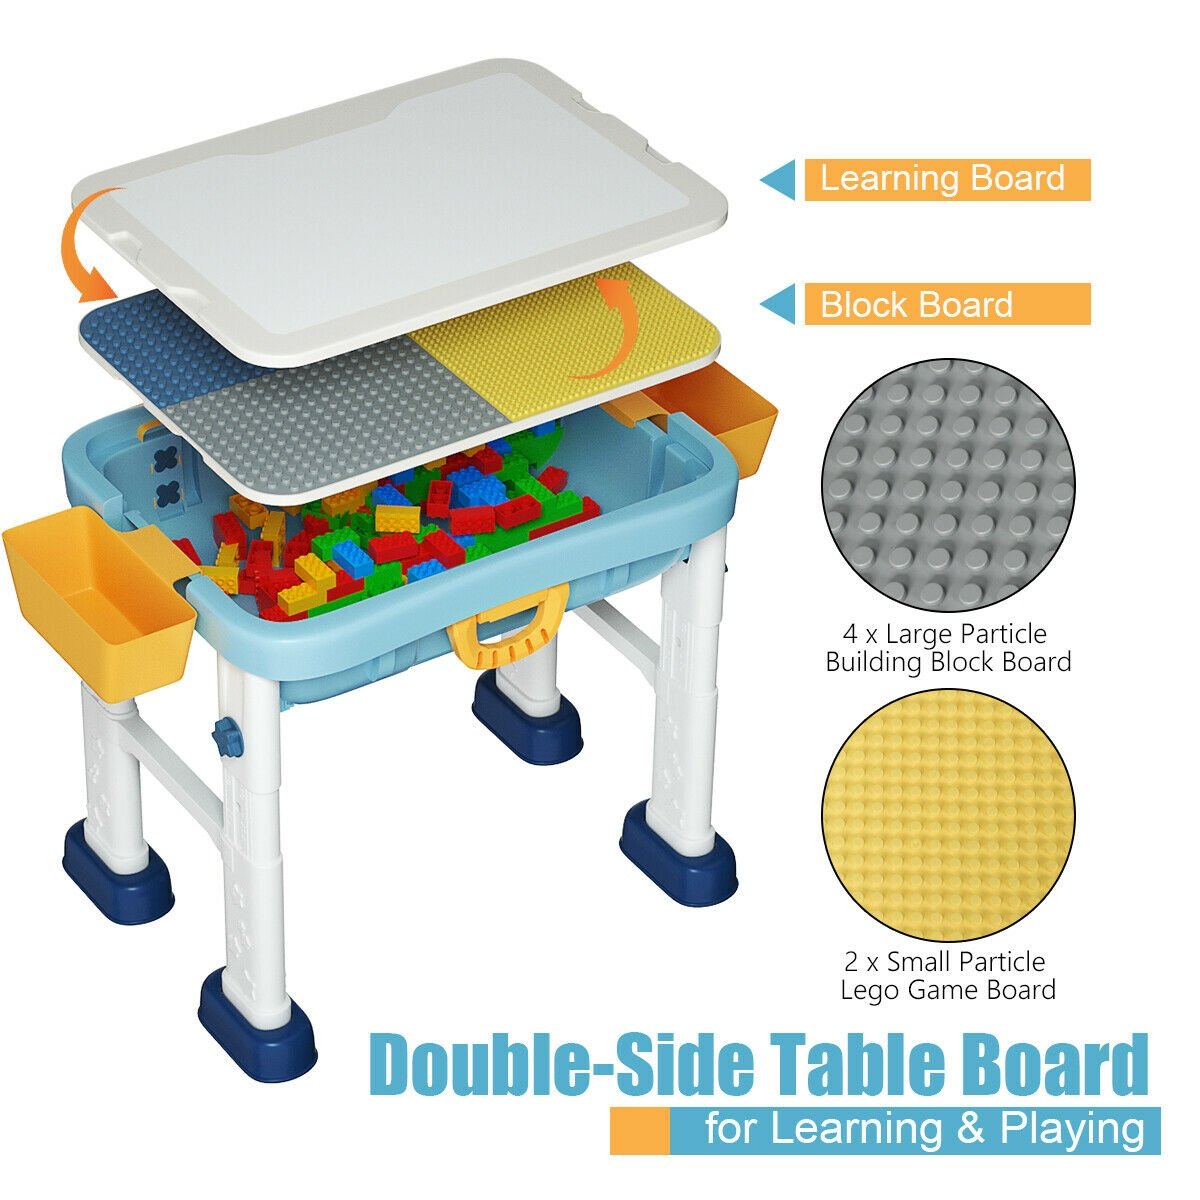 6-in-1 Kids Activity Table Set with Chair, Multicolor - Gallery Canada